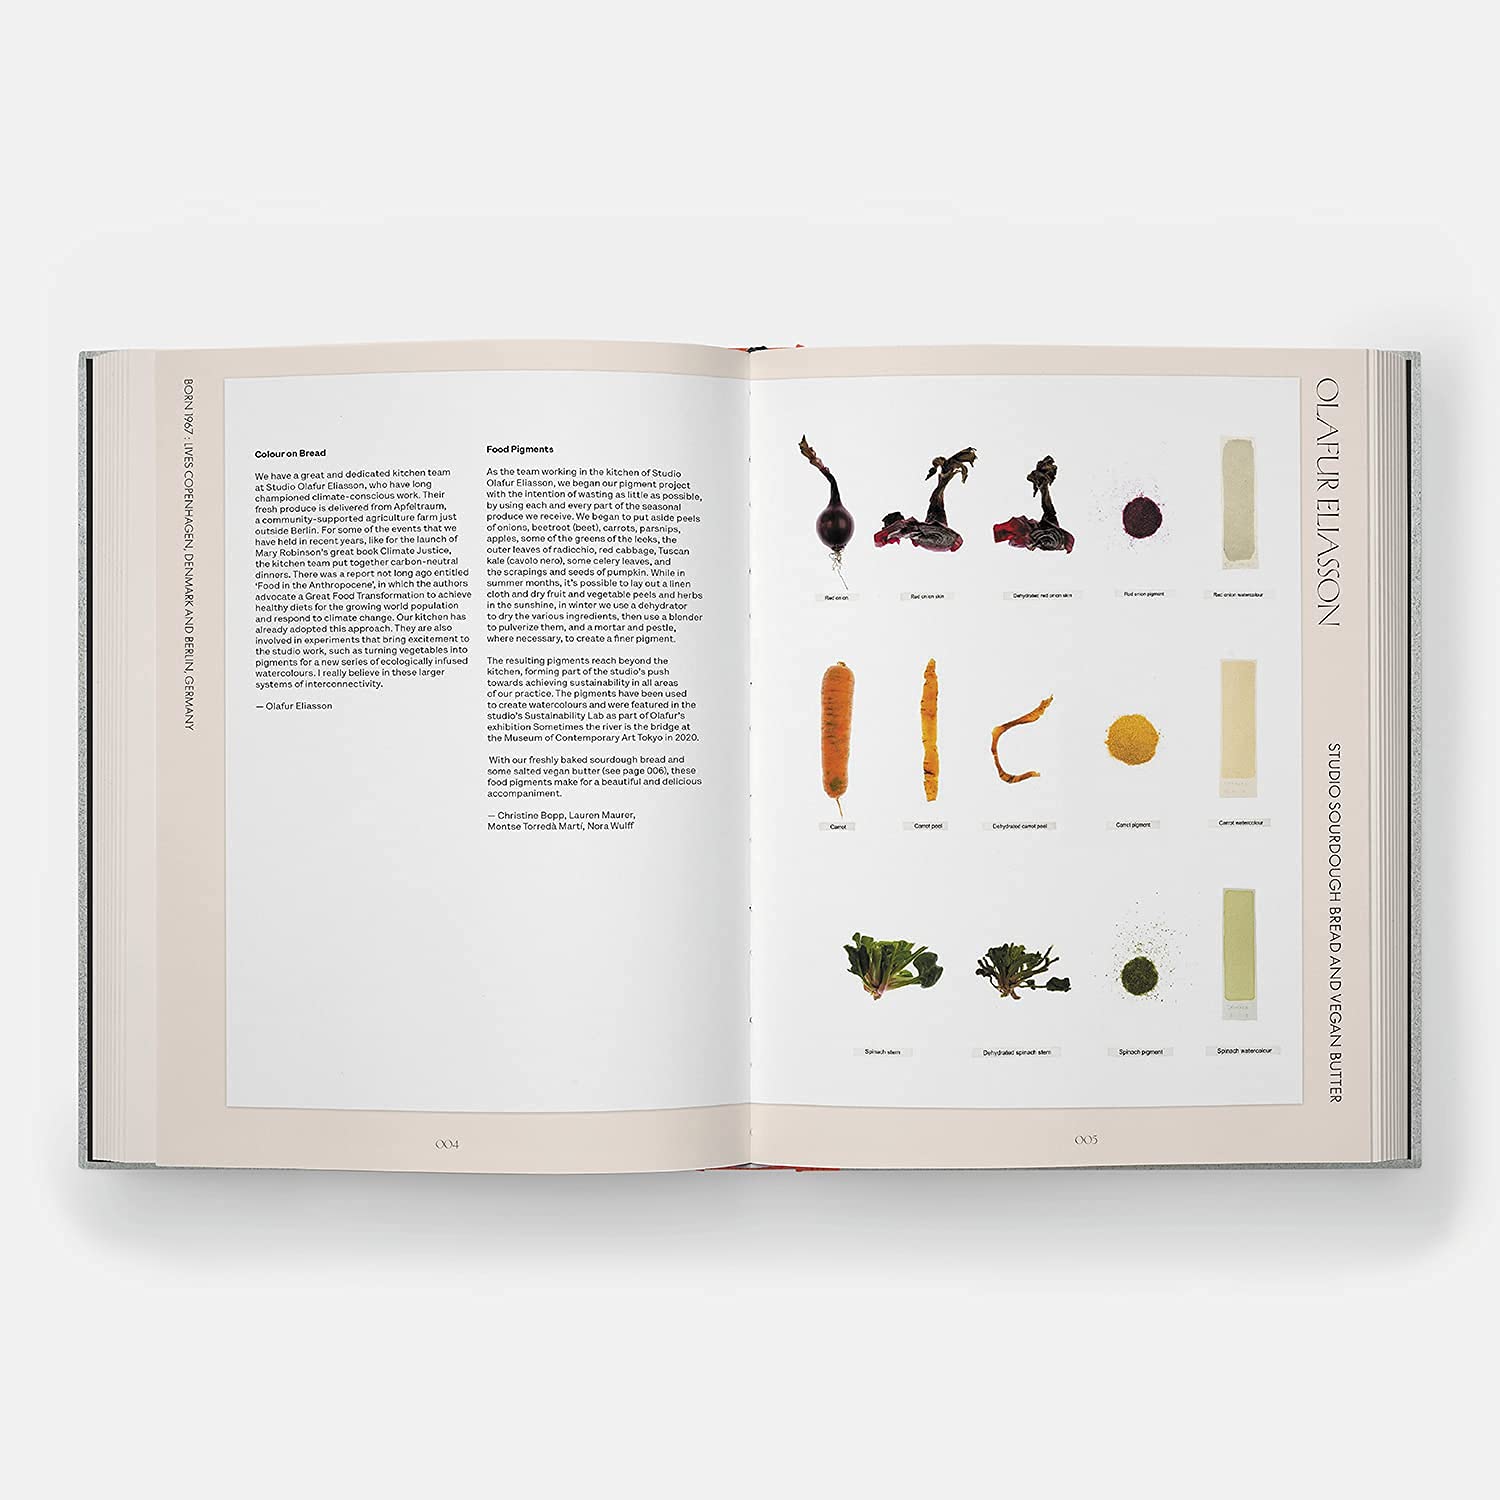 The Kitchen Studio: Culinary Creations by Artists (Massimo Bottura, et al)